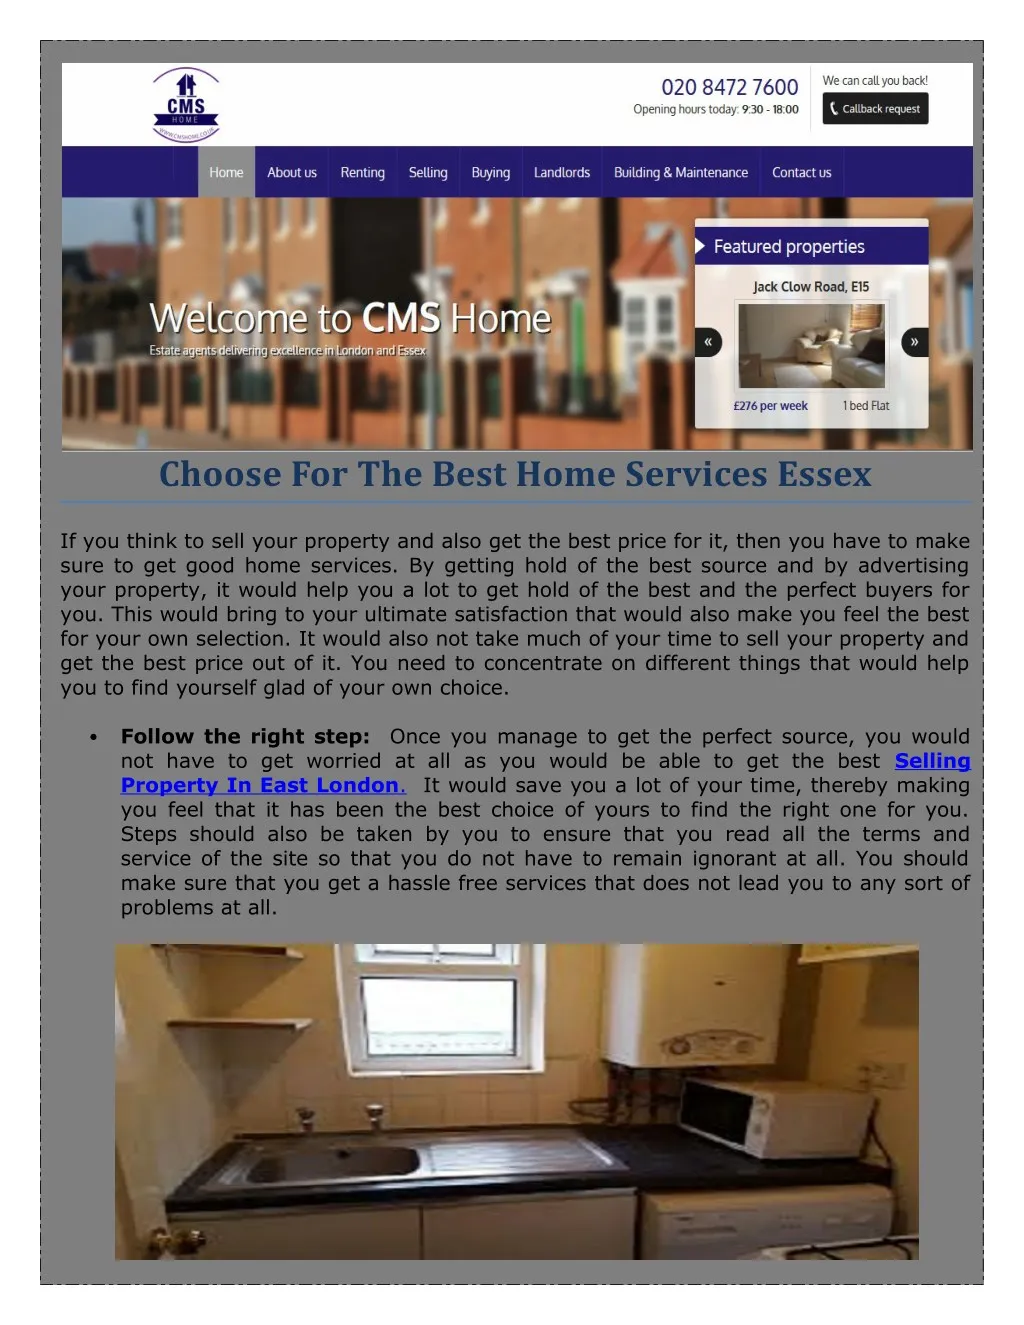 choose for the best home services essex